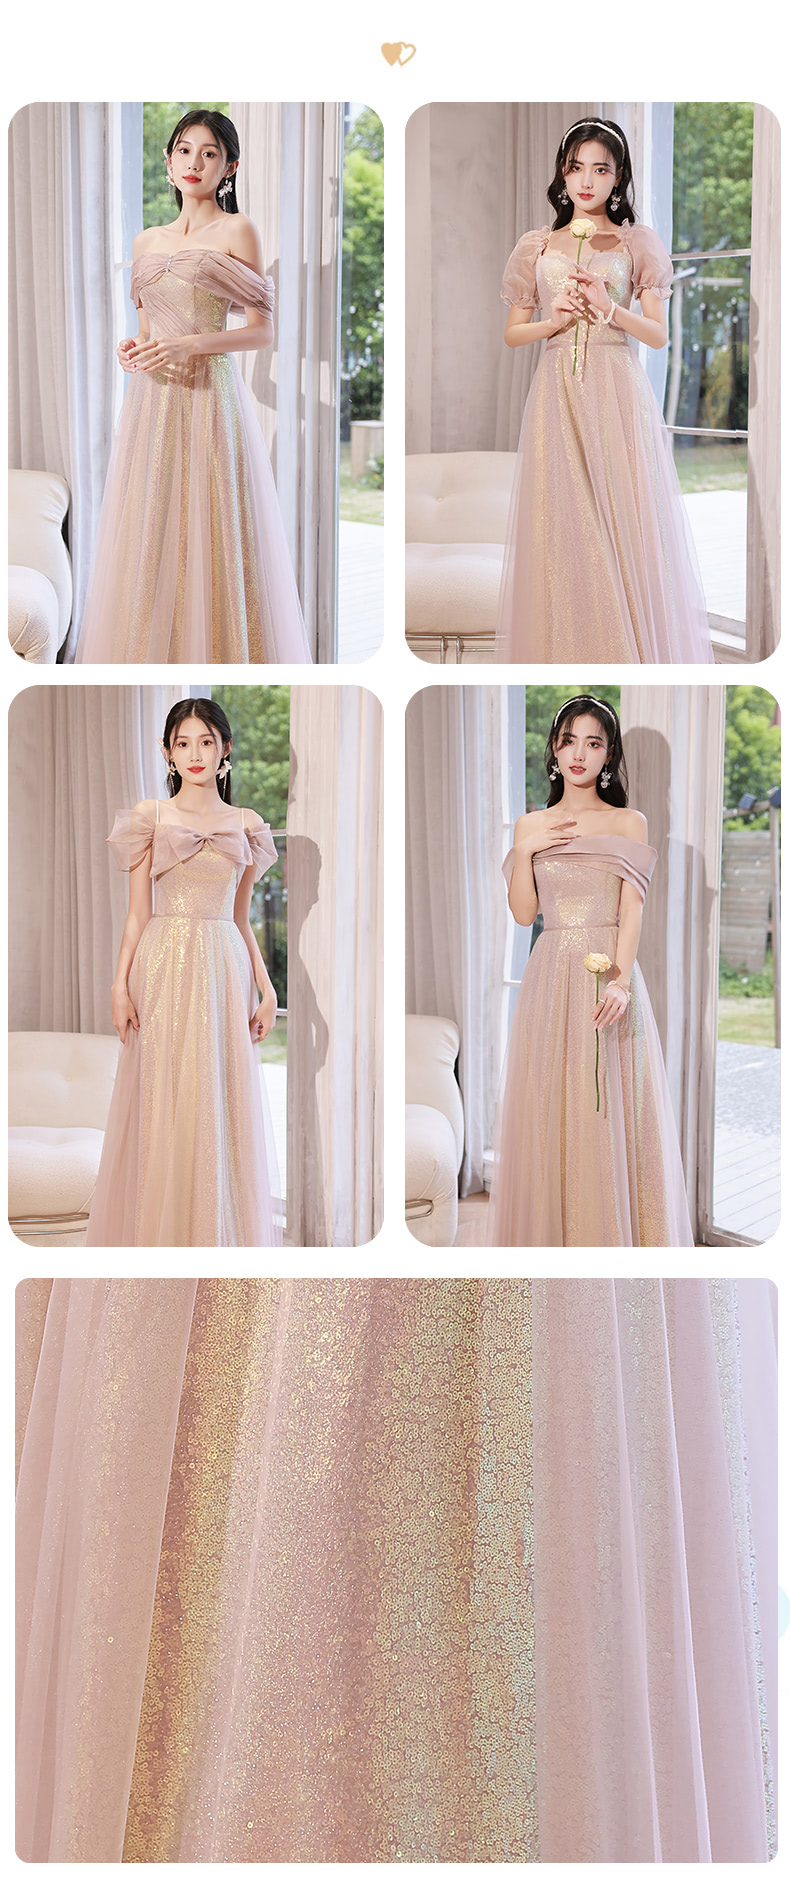 Fairy-Starry-Pink-Slim-Bridesmaid-Long-Dress-Wedding-Party-Gown13.jpg